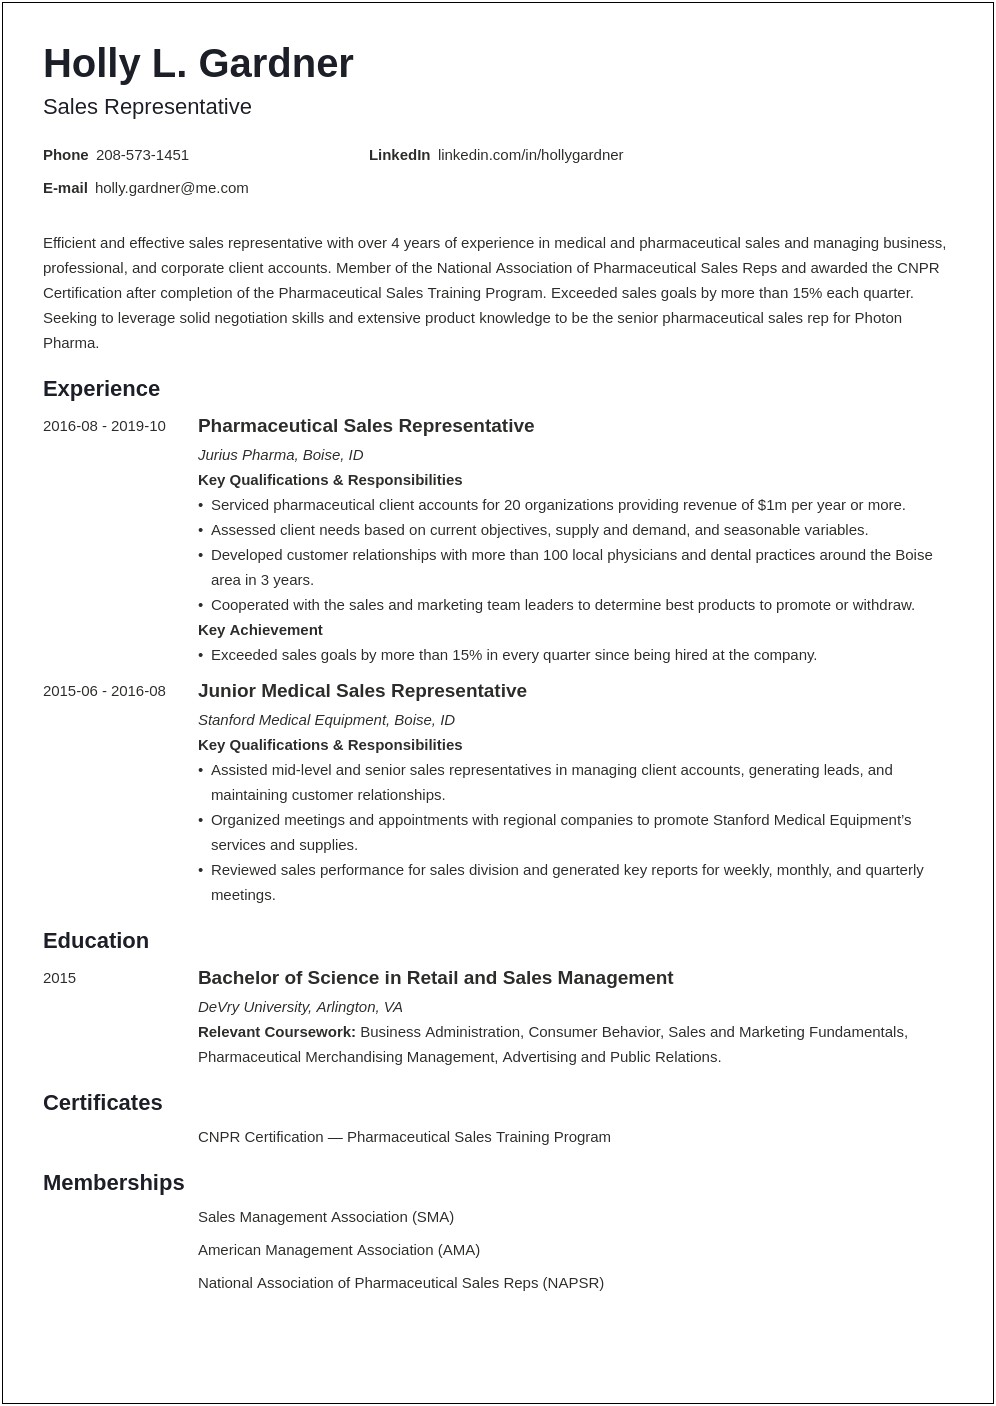 Sales Professional Resume Objective Sample